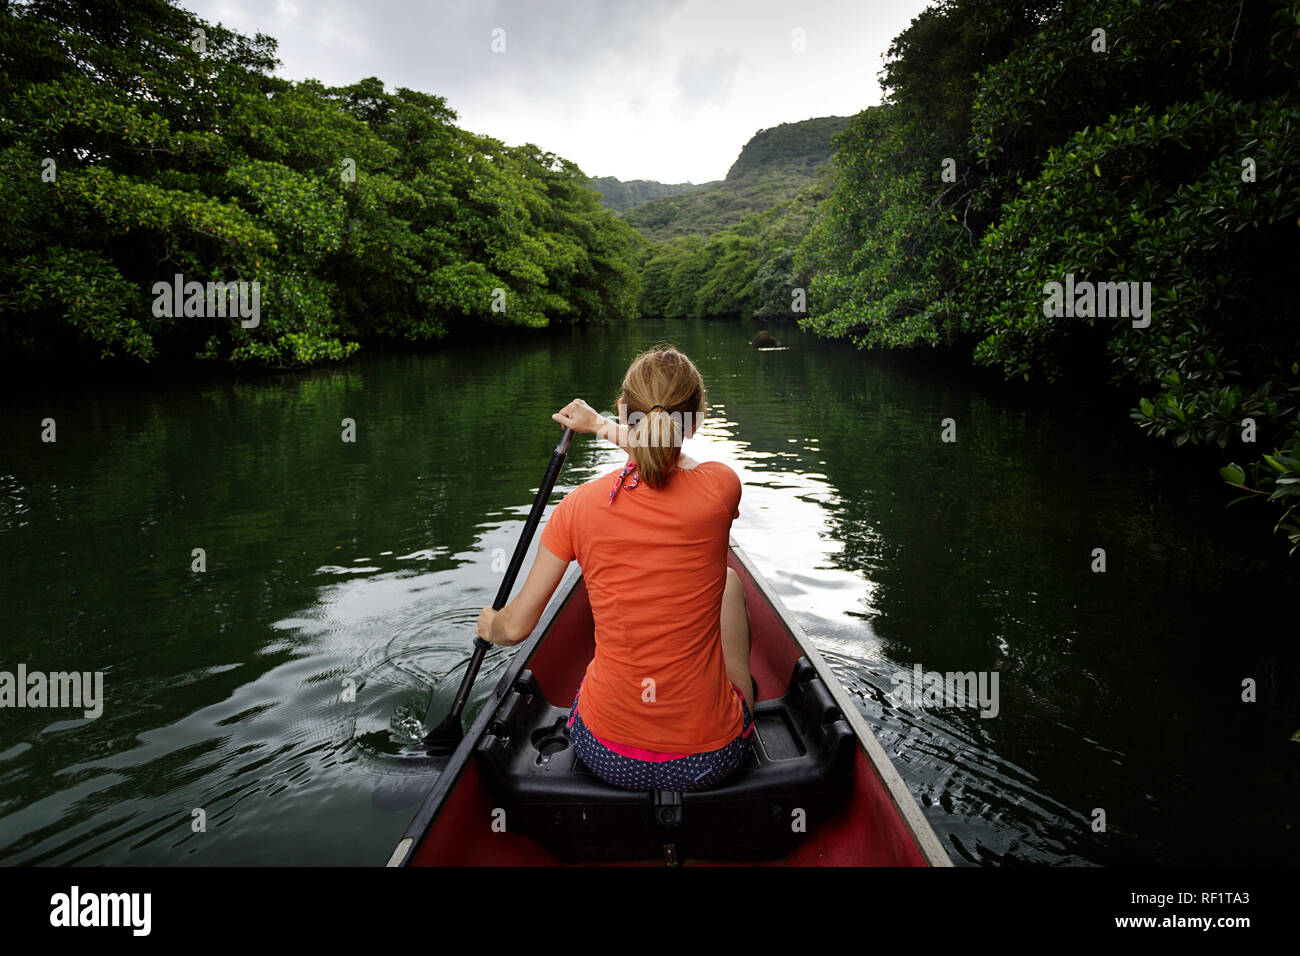 Woman canoeing on a river in mangrove forest, Iriomote, JApan Stock Photo